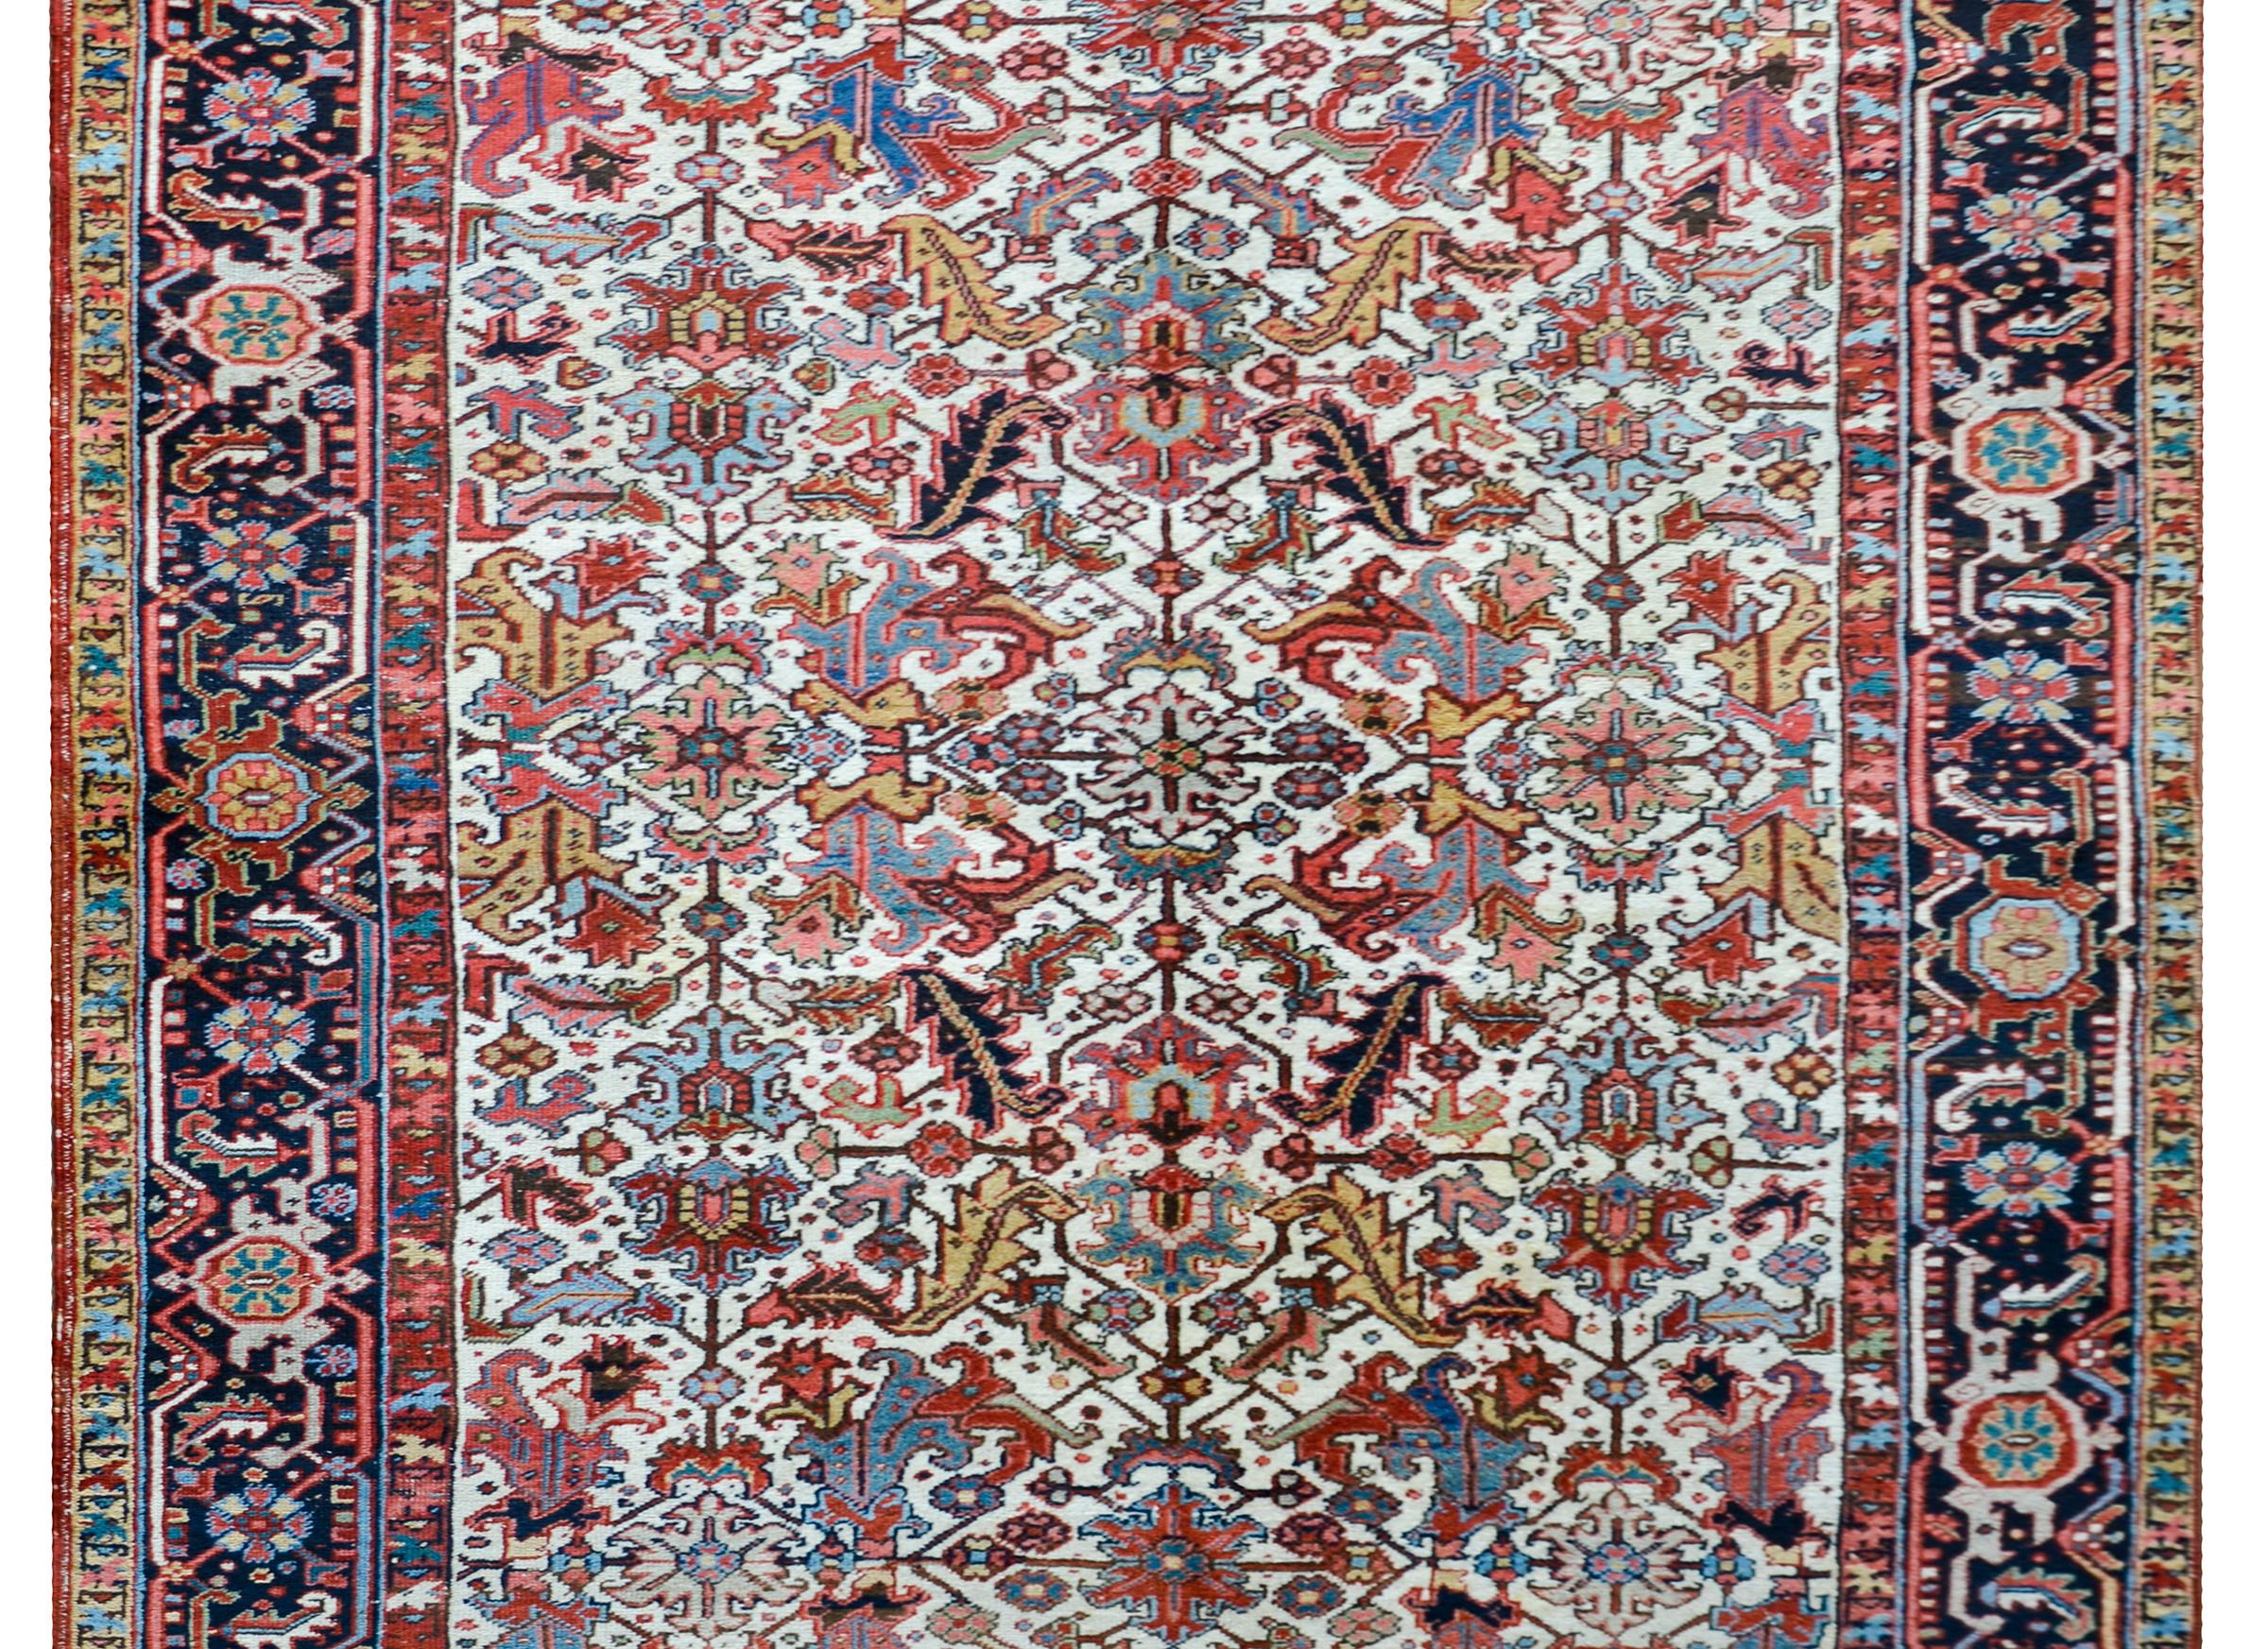 A beautiful early 20th century Persian Heriz rug a fantastic mirrored floral pattern with large-scale leaves and flowers, all woven in myriad colors including crimson, pink, gold, light and dark indigo, all against a white background. The border is